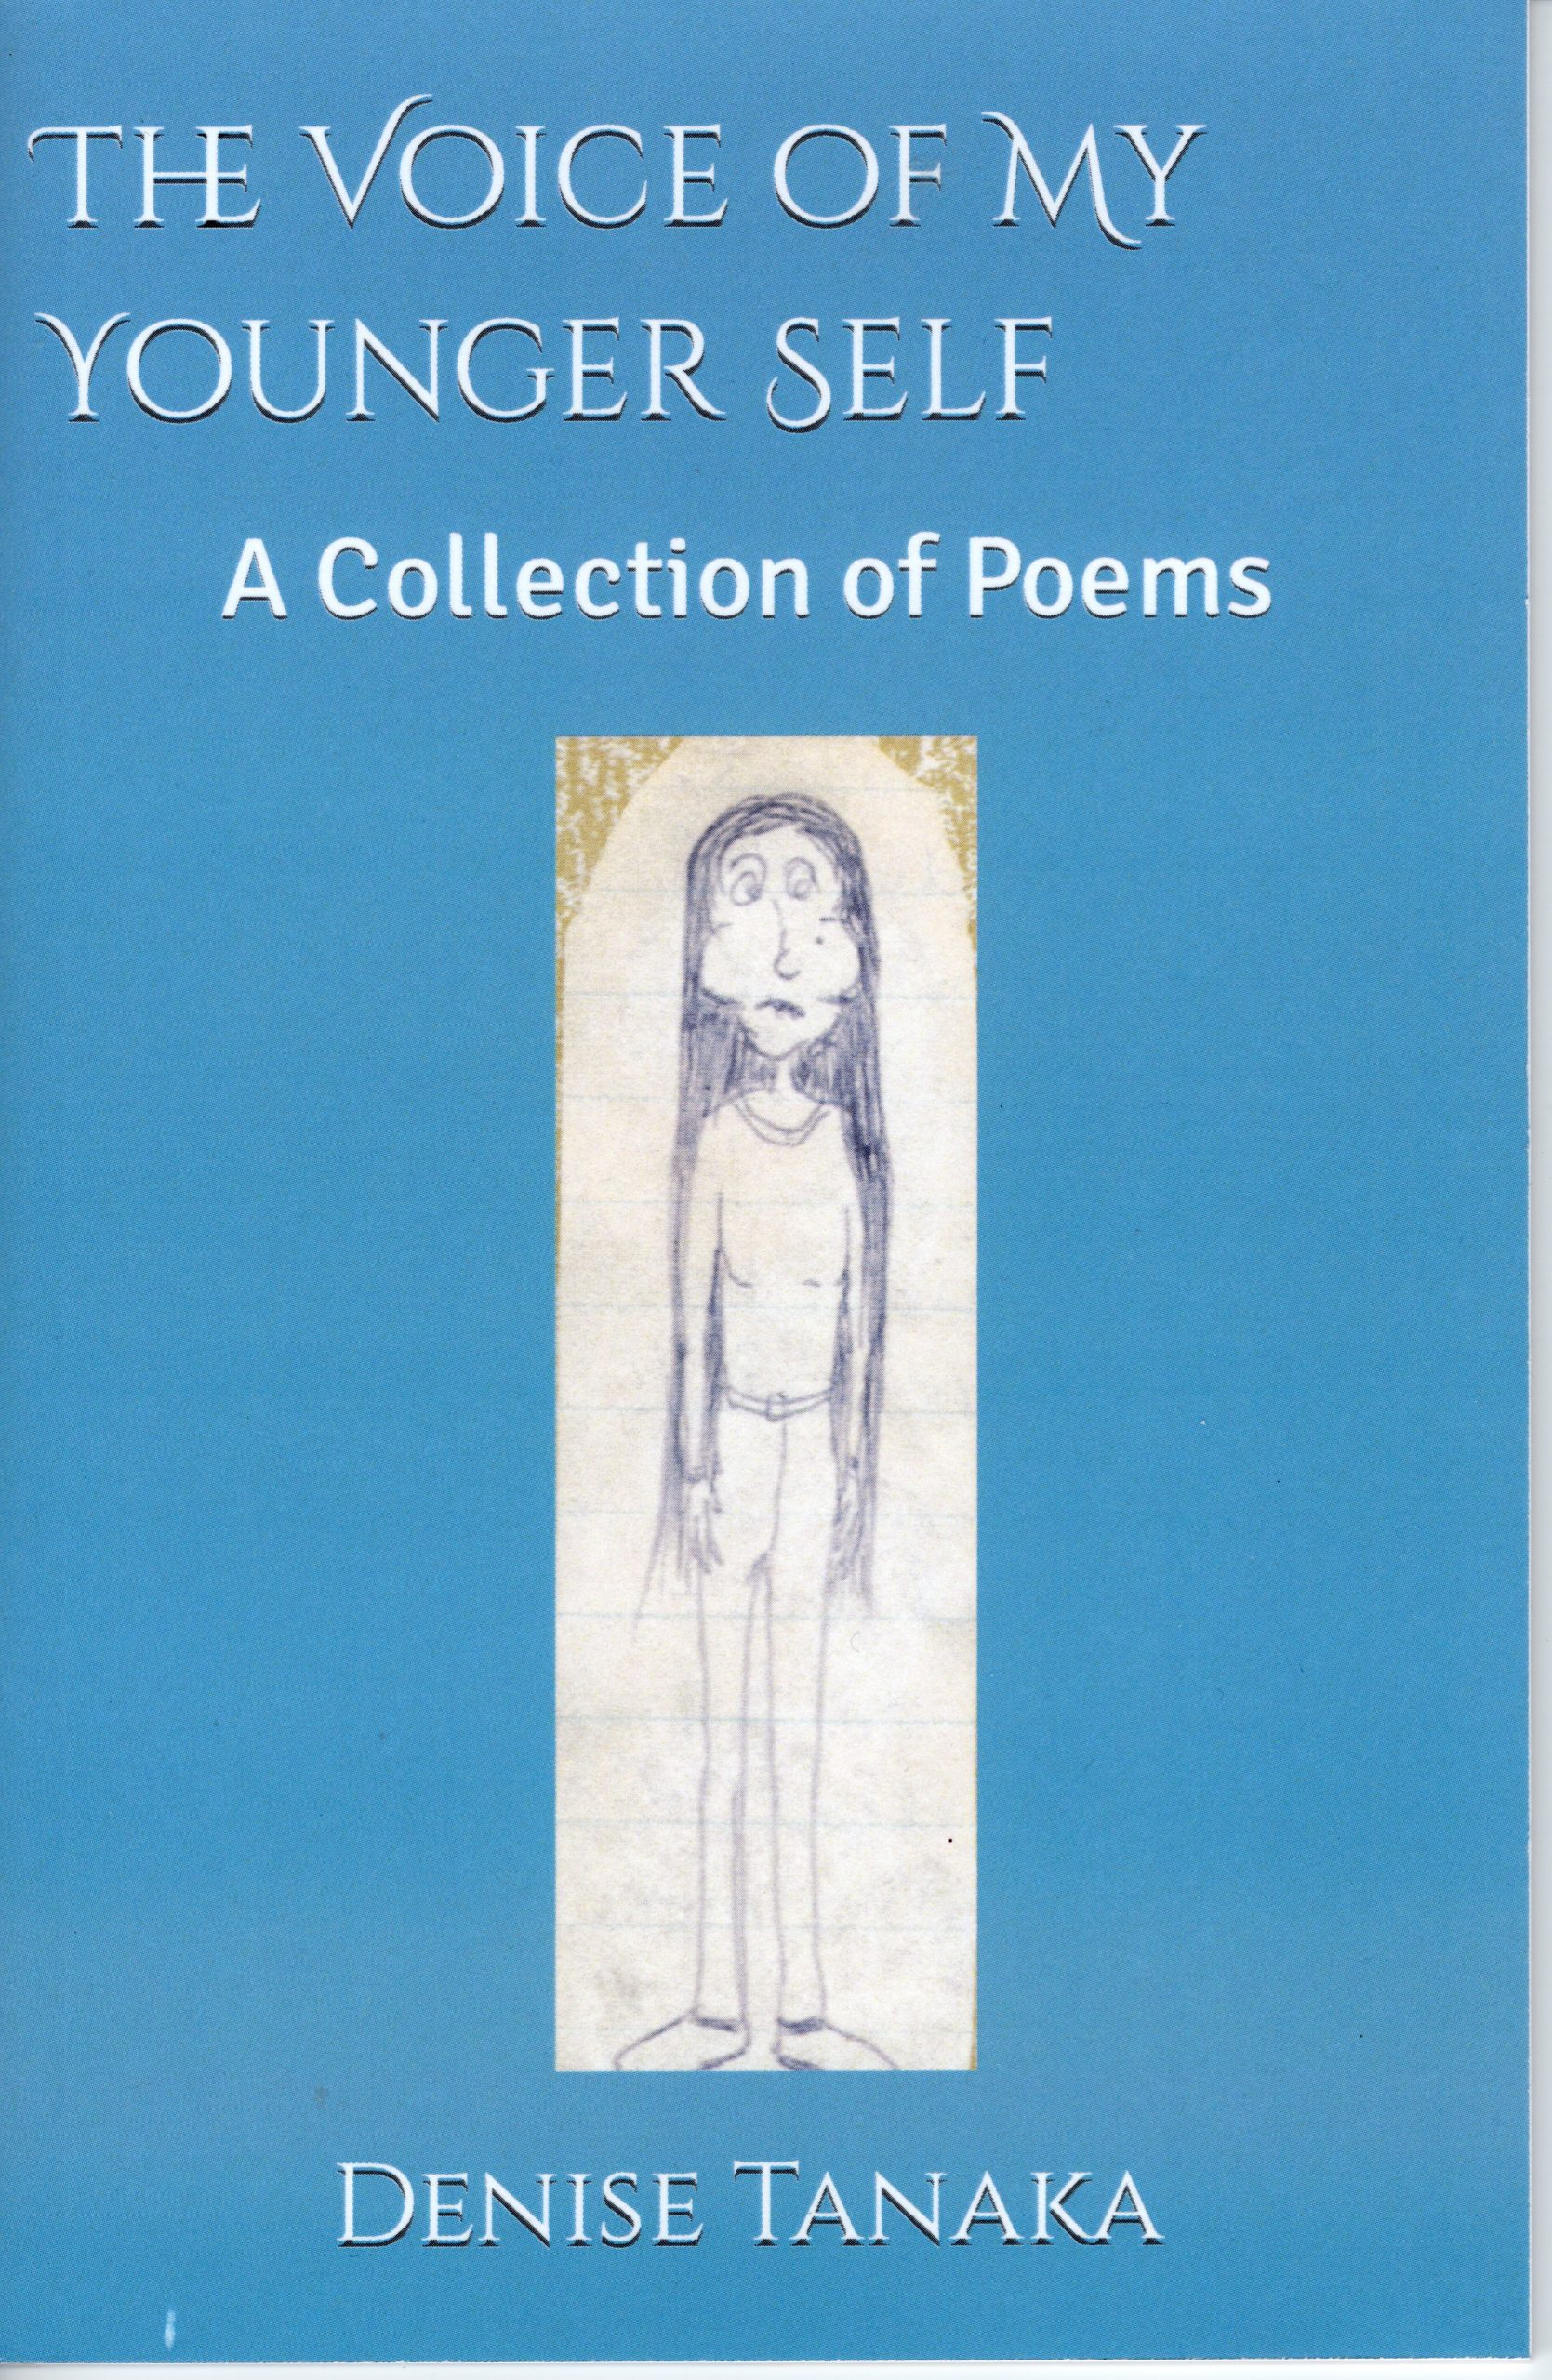 poetry book cover, blue background with ballpoint pen illustration in center